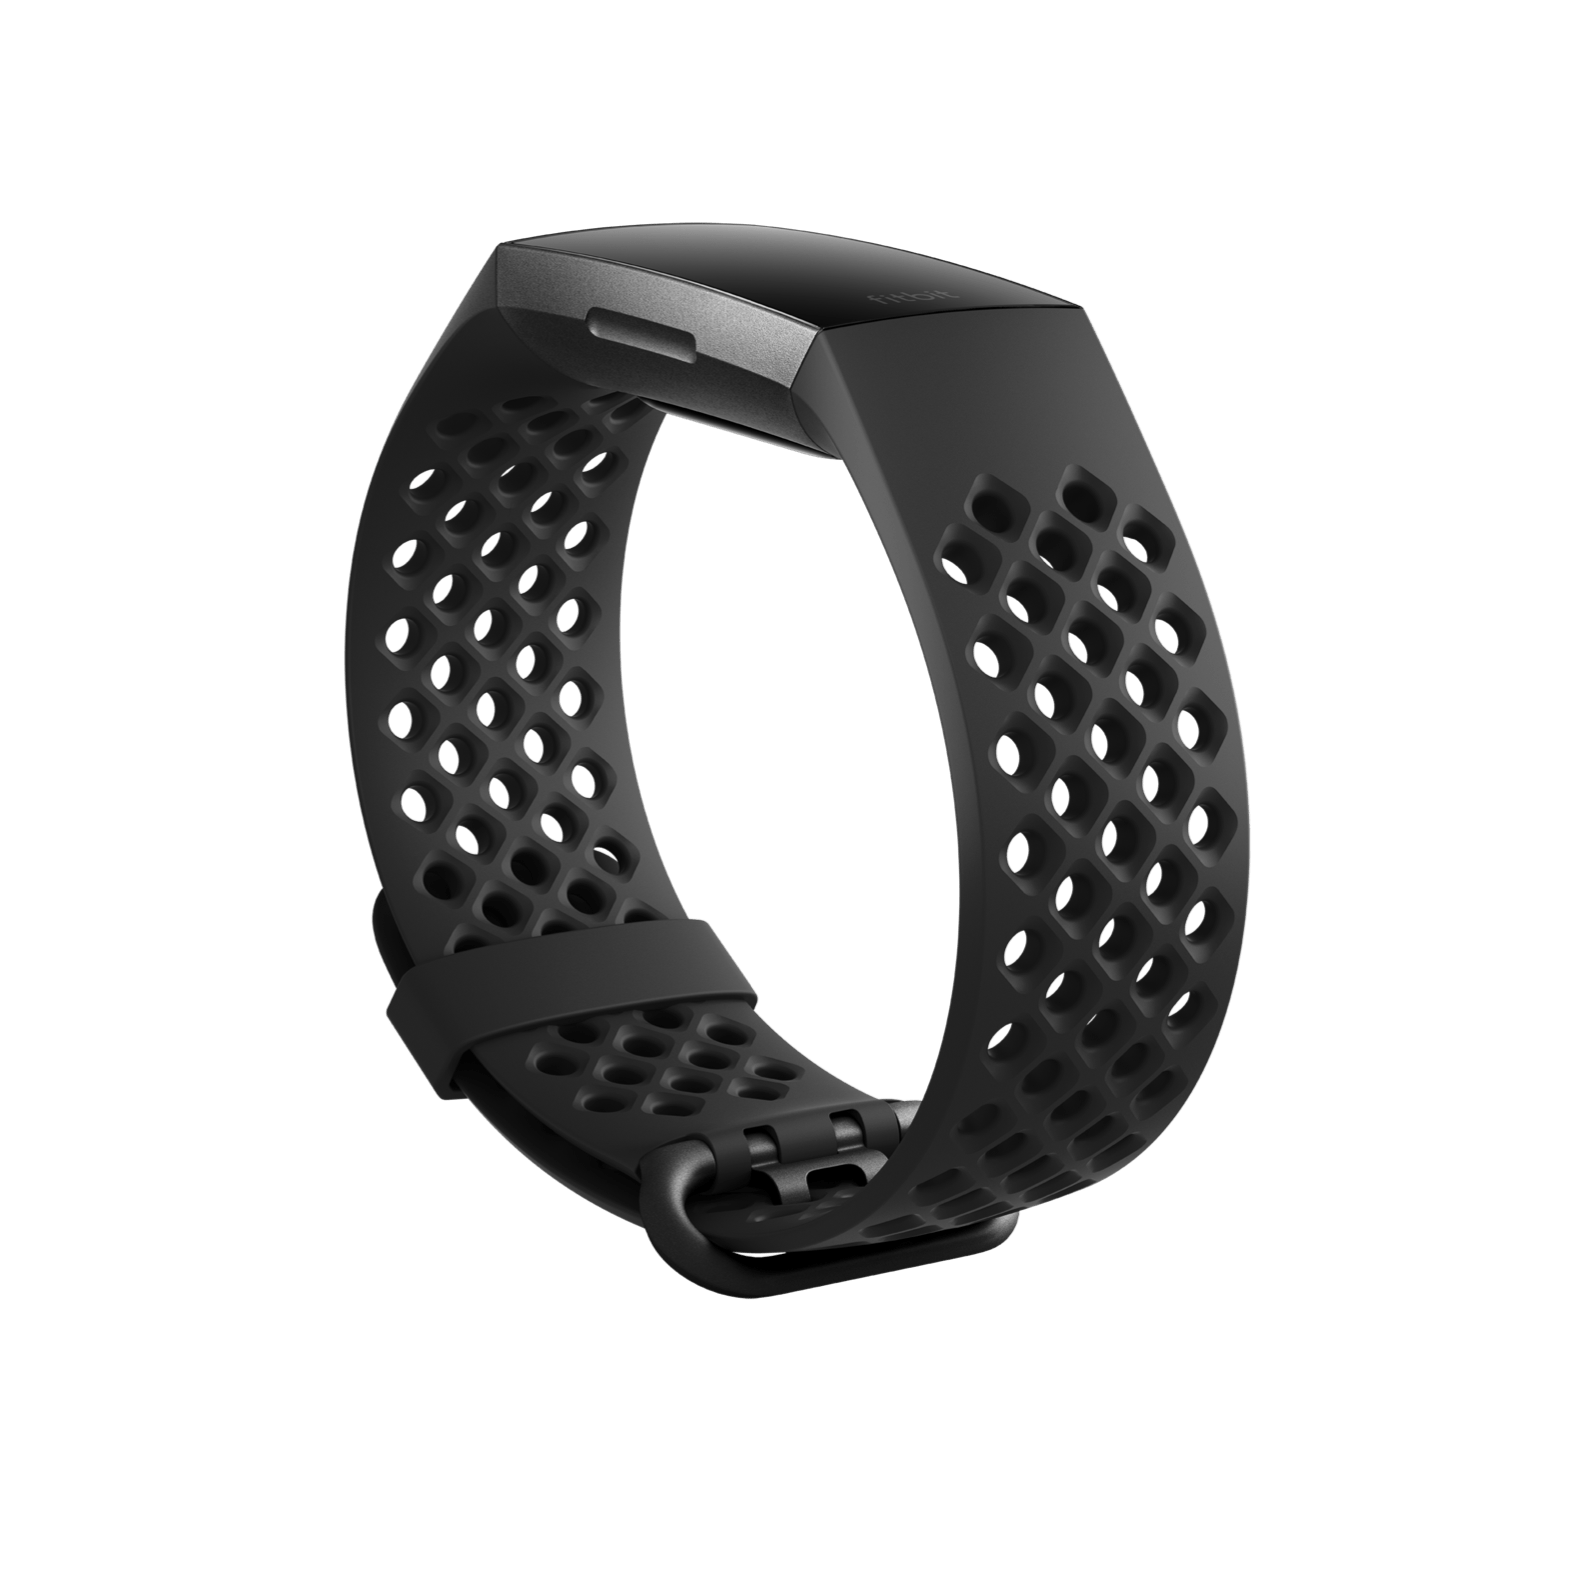 white fitbit charge 3 band